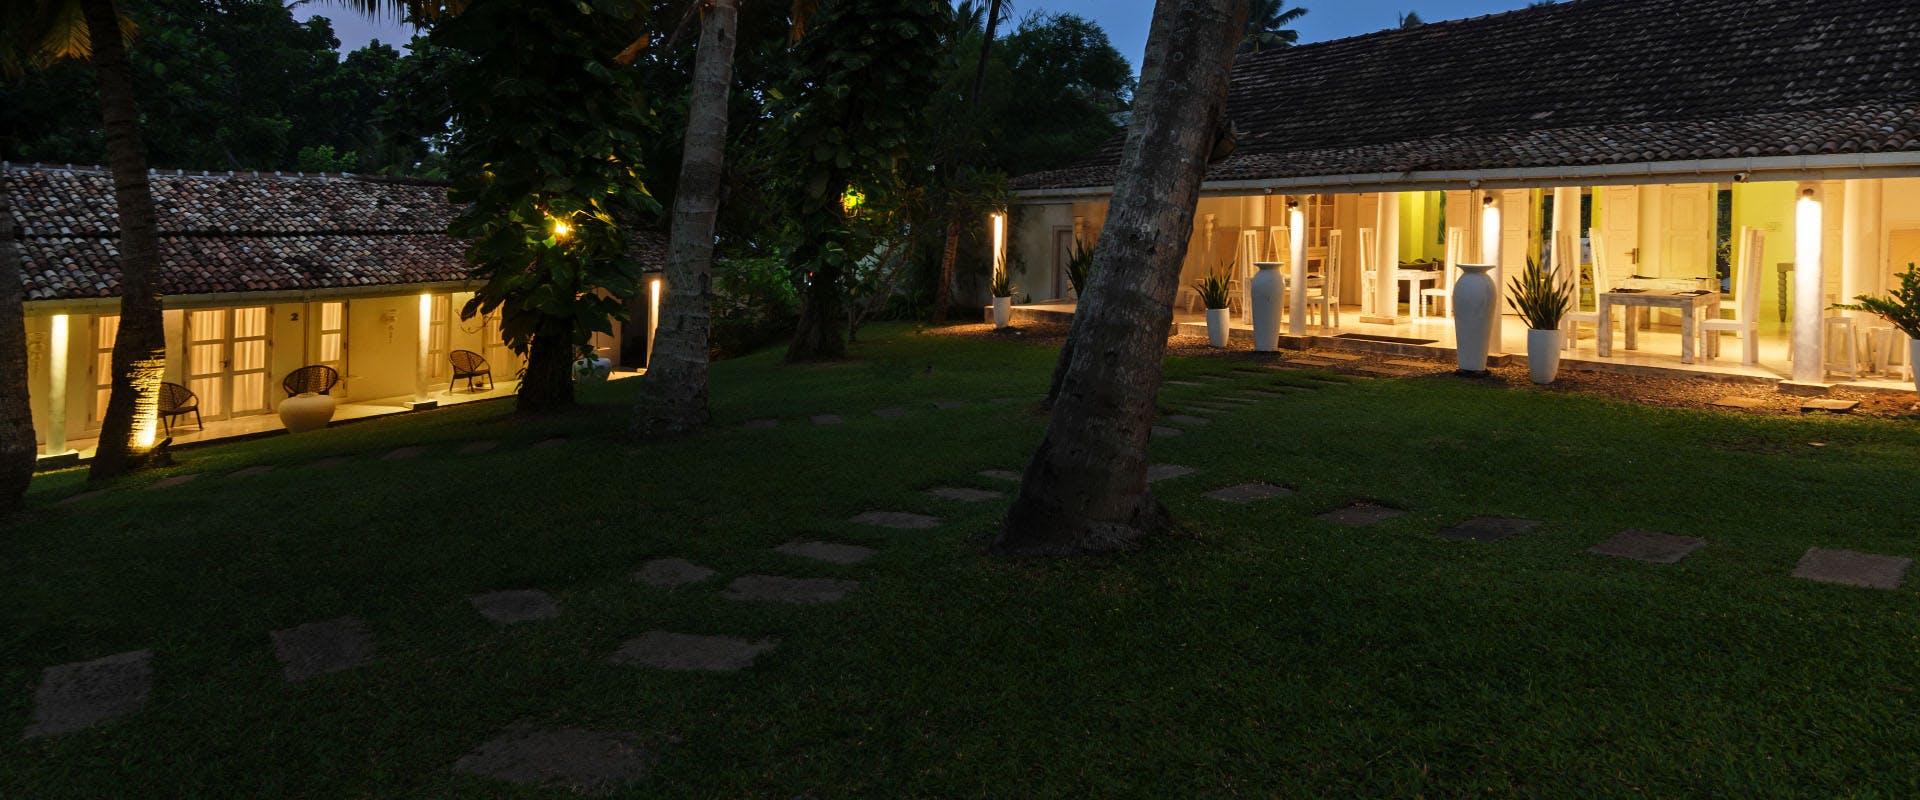 Villa Suite and dining at W15 Ahangama Weligama Galle Sri Lanka